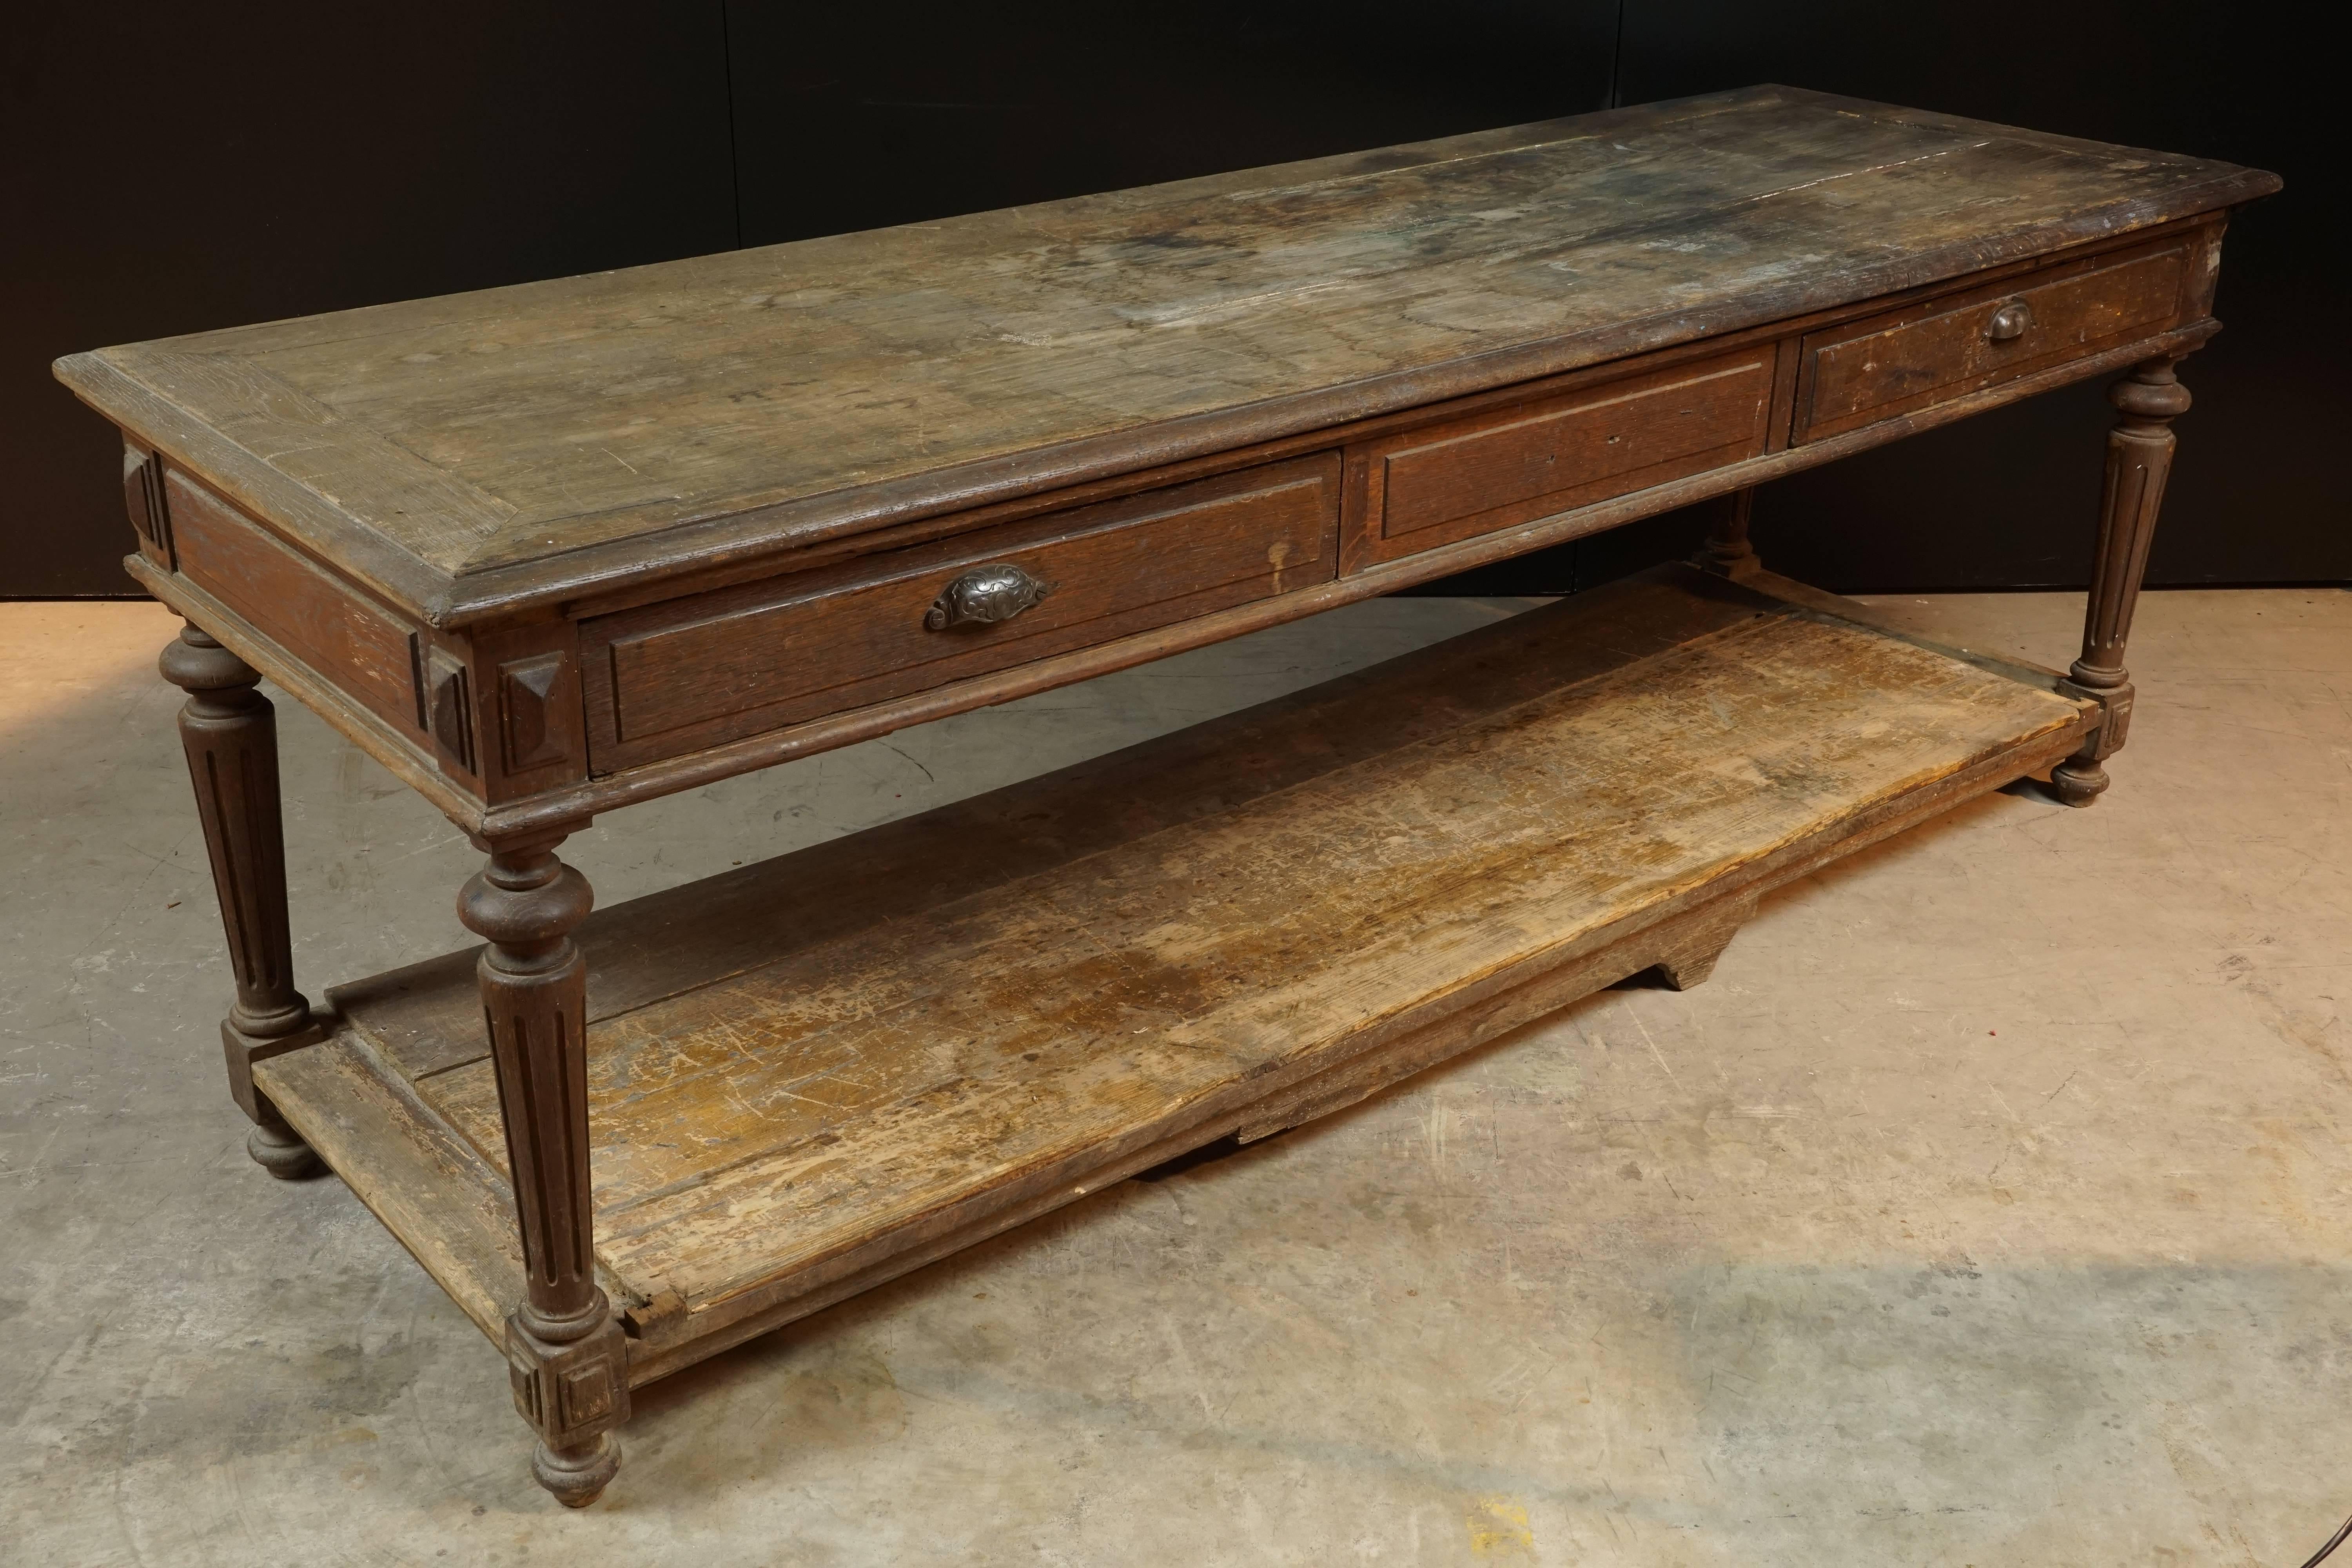 Early French draper table, circa 1880. Solid oak construction with superb patina and wear. Two drawers with original hardware.